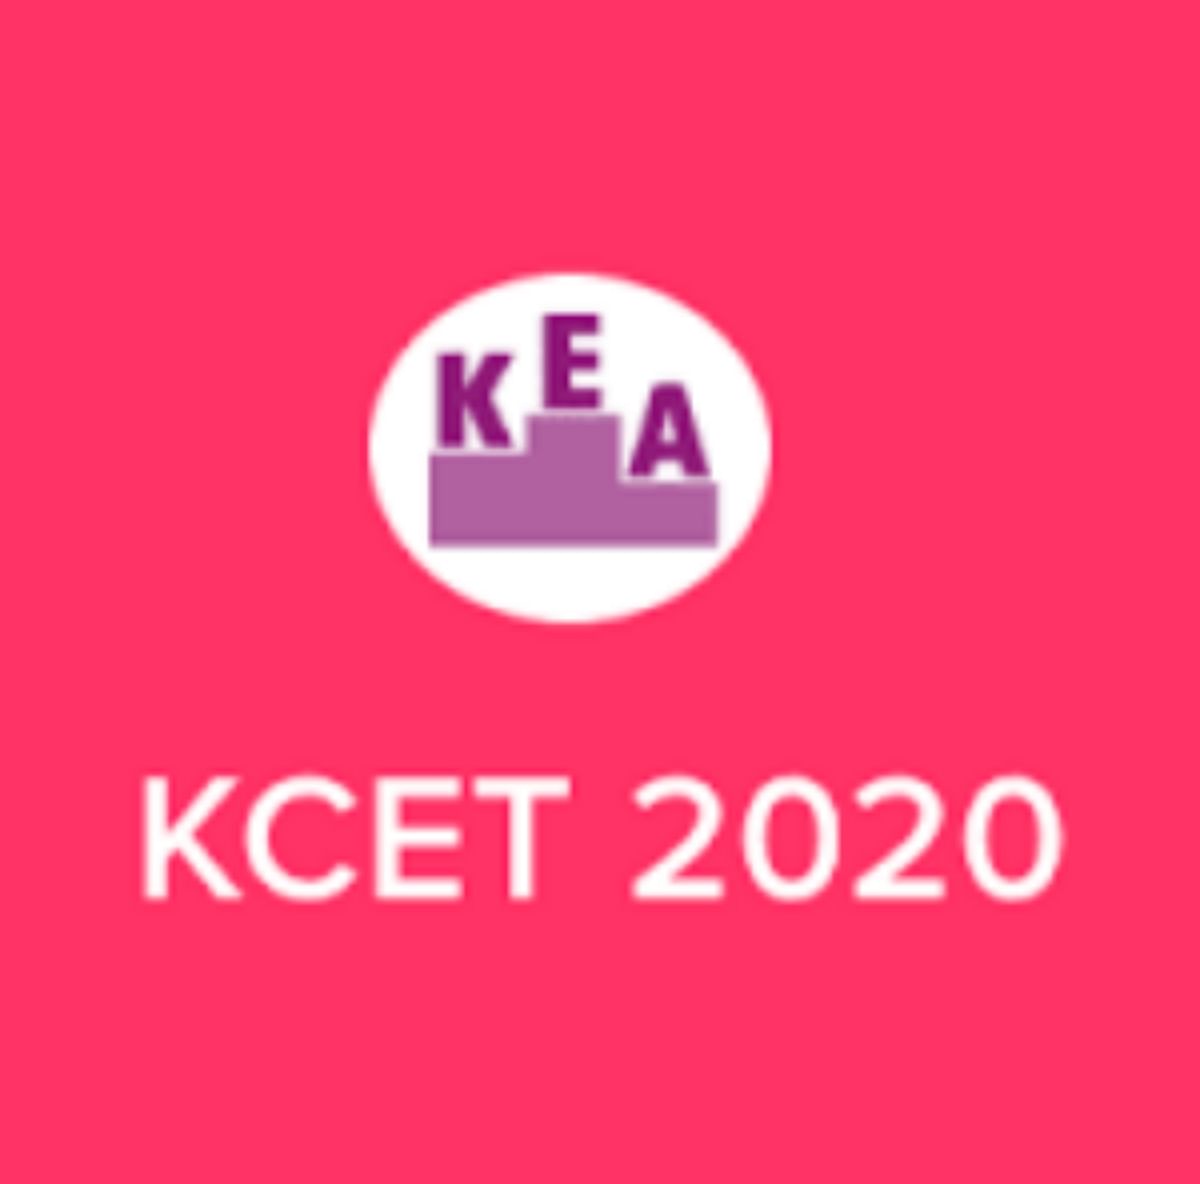 KCET 2020: Last Day to Make Changes in the Form Today, Correction Window Closes at 6 PM